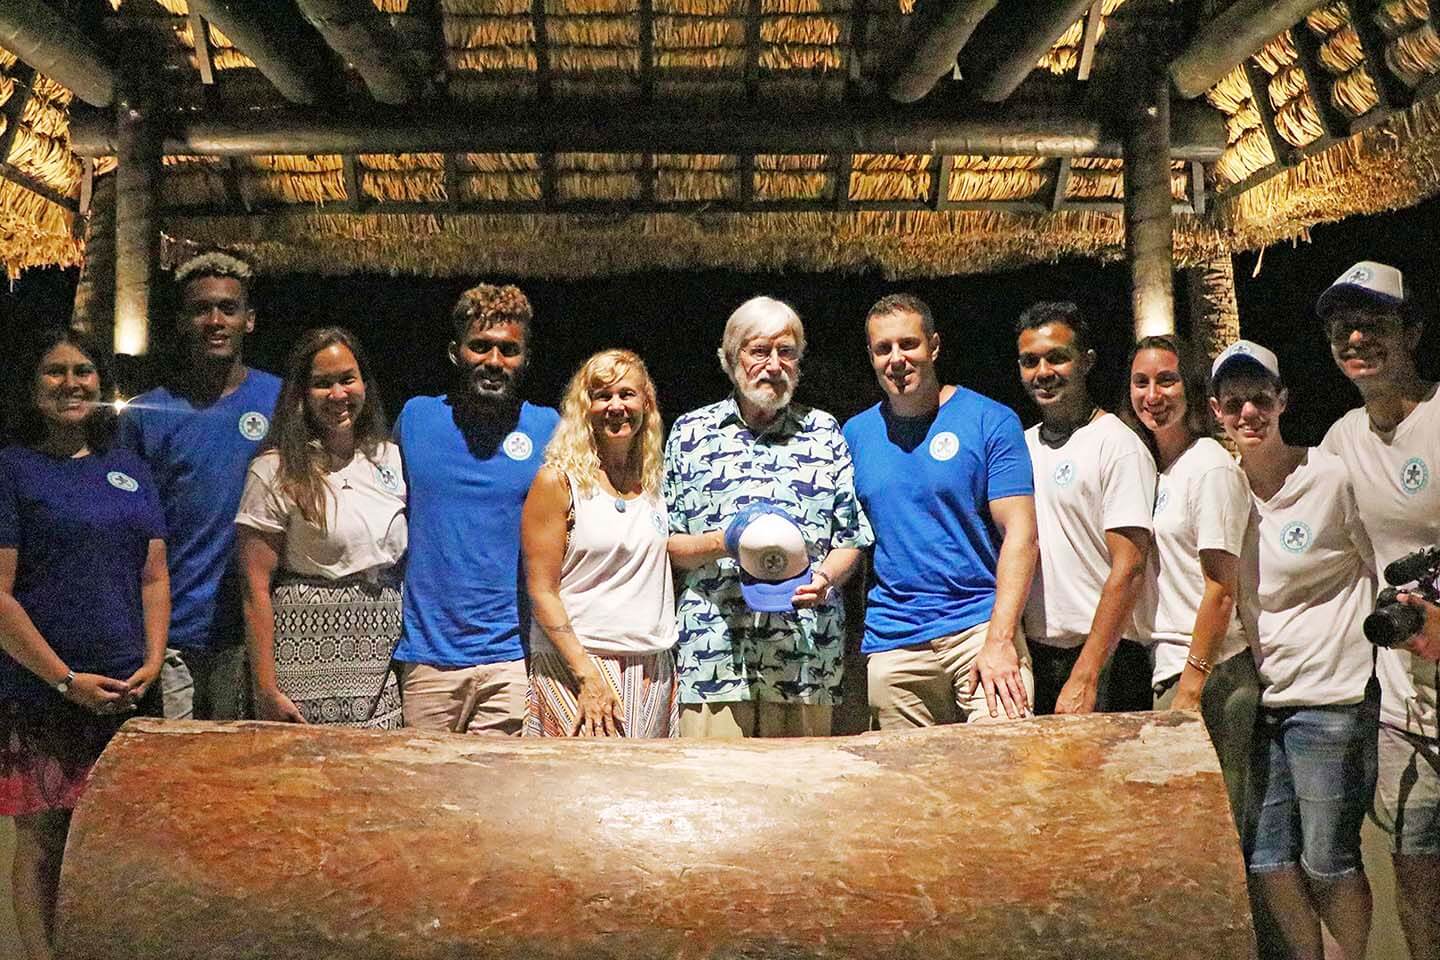 Protector of Paradise meeting Jean-michel Cousteau!